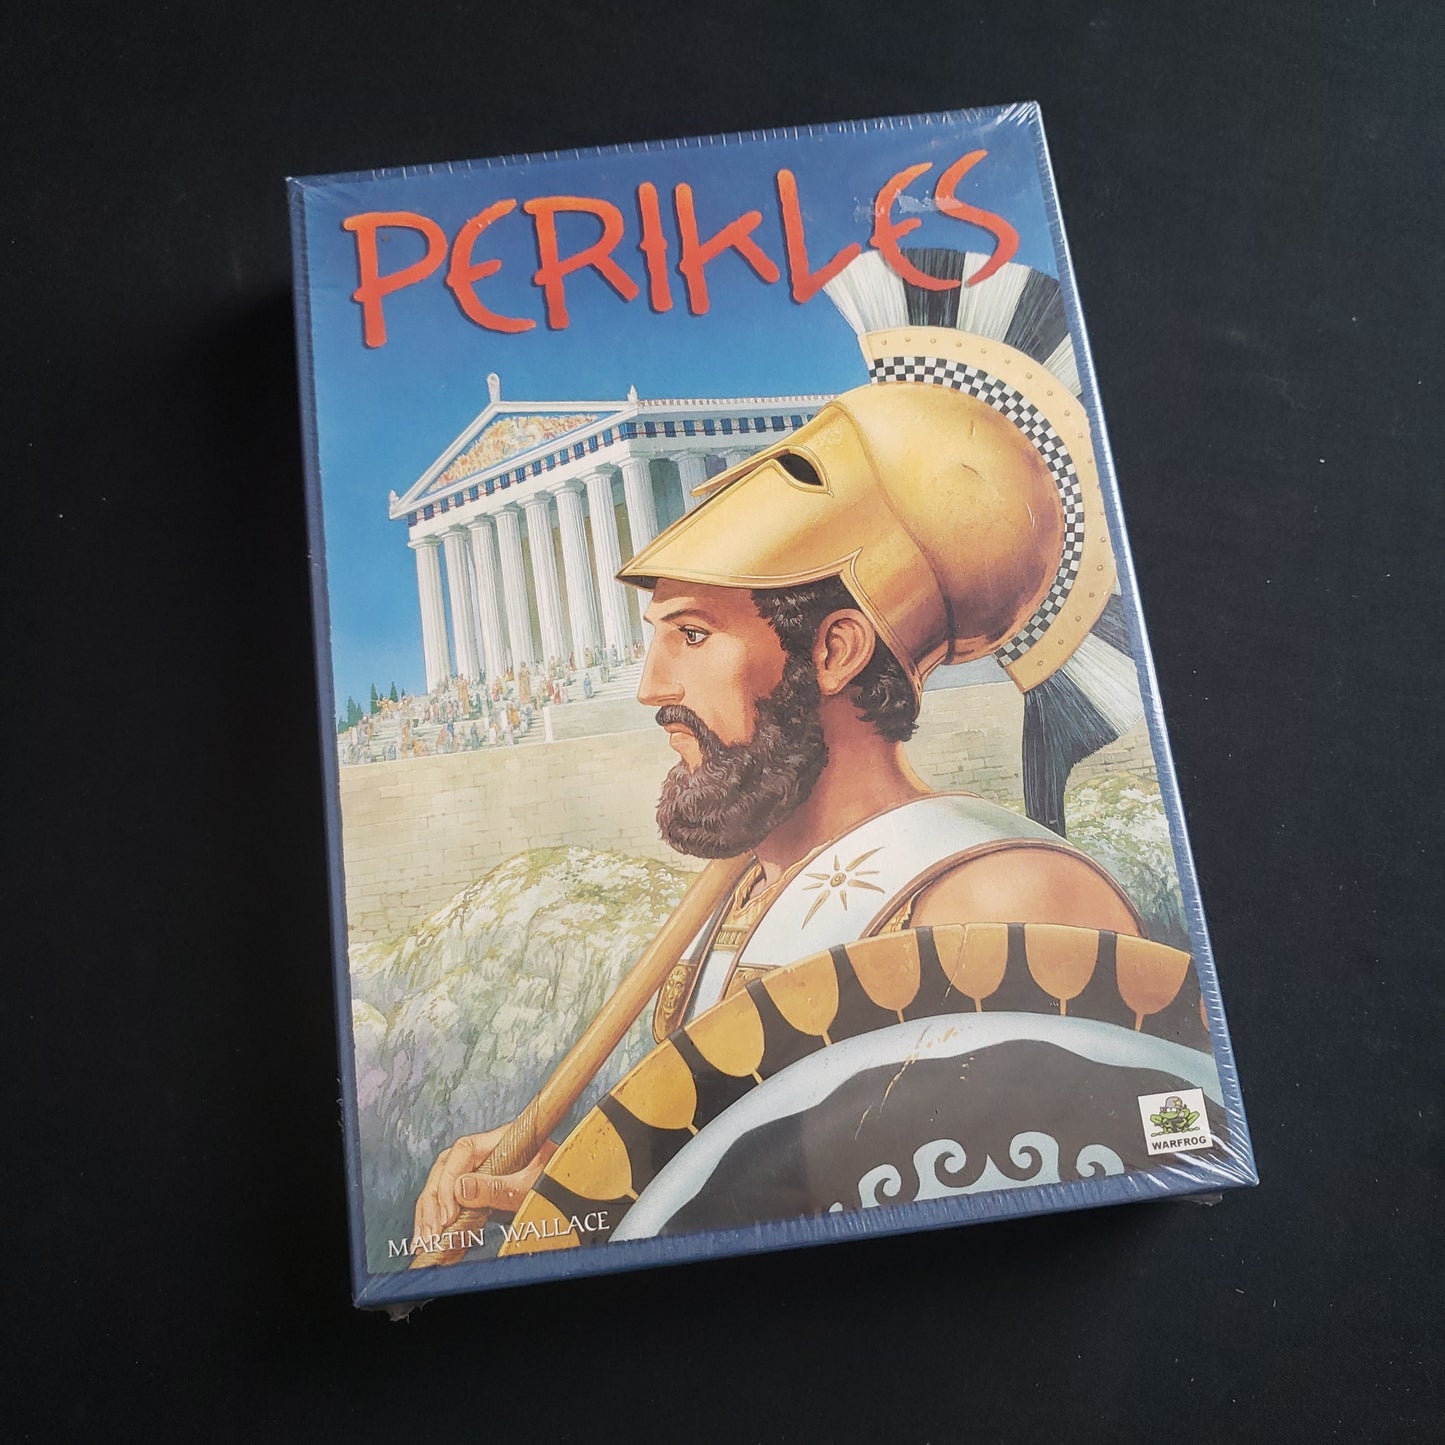 Image shows the front cover of the box of the Perikles board game